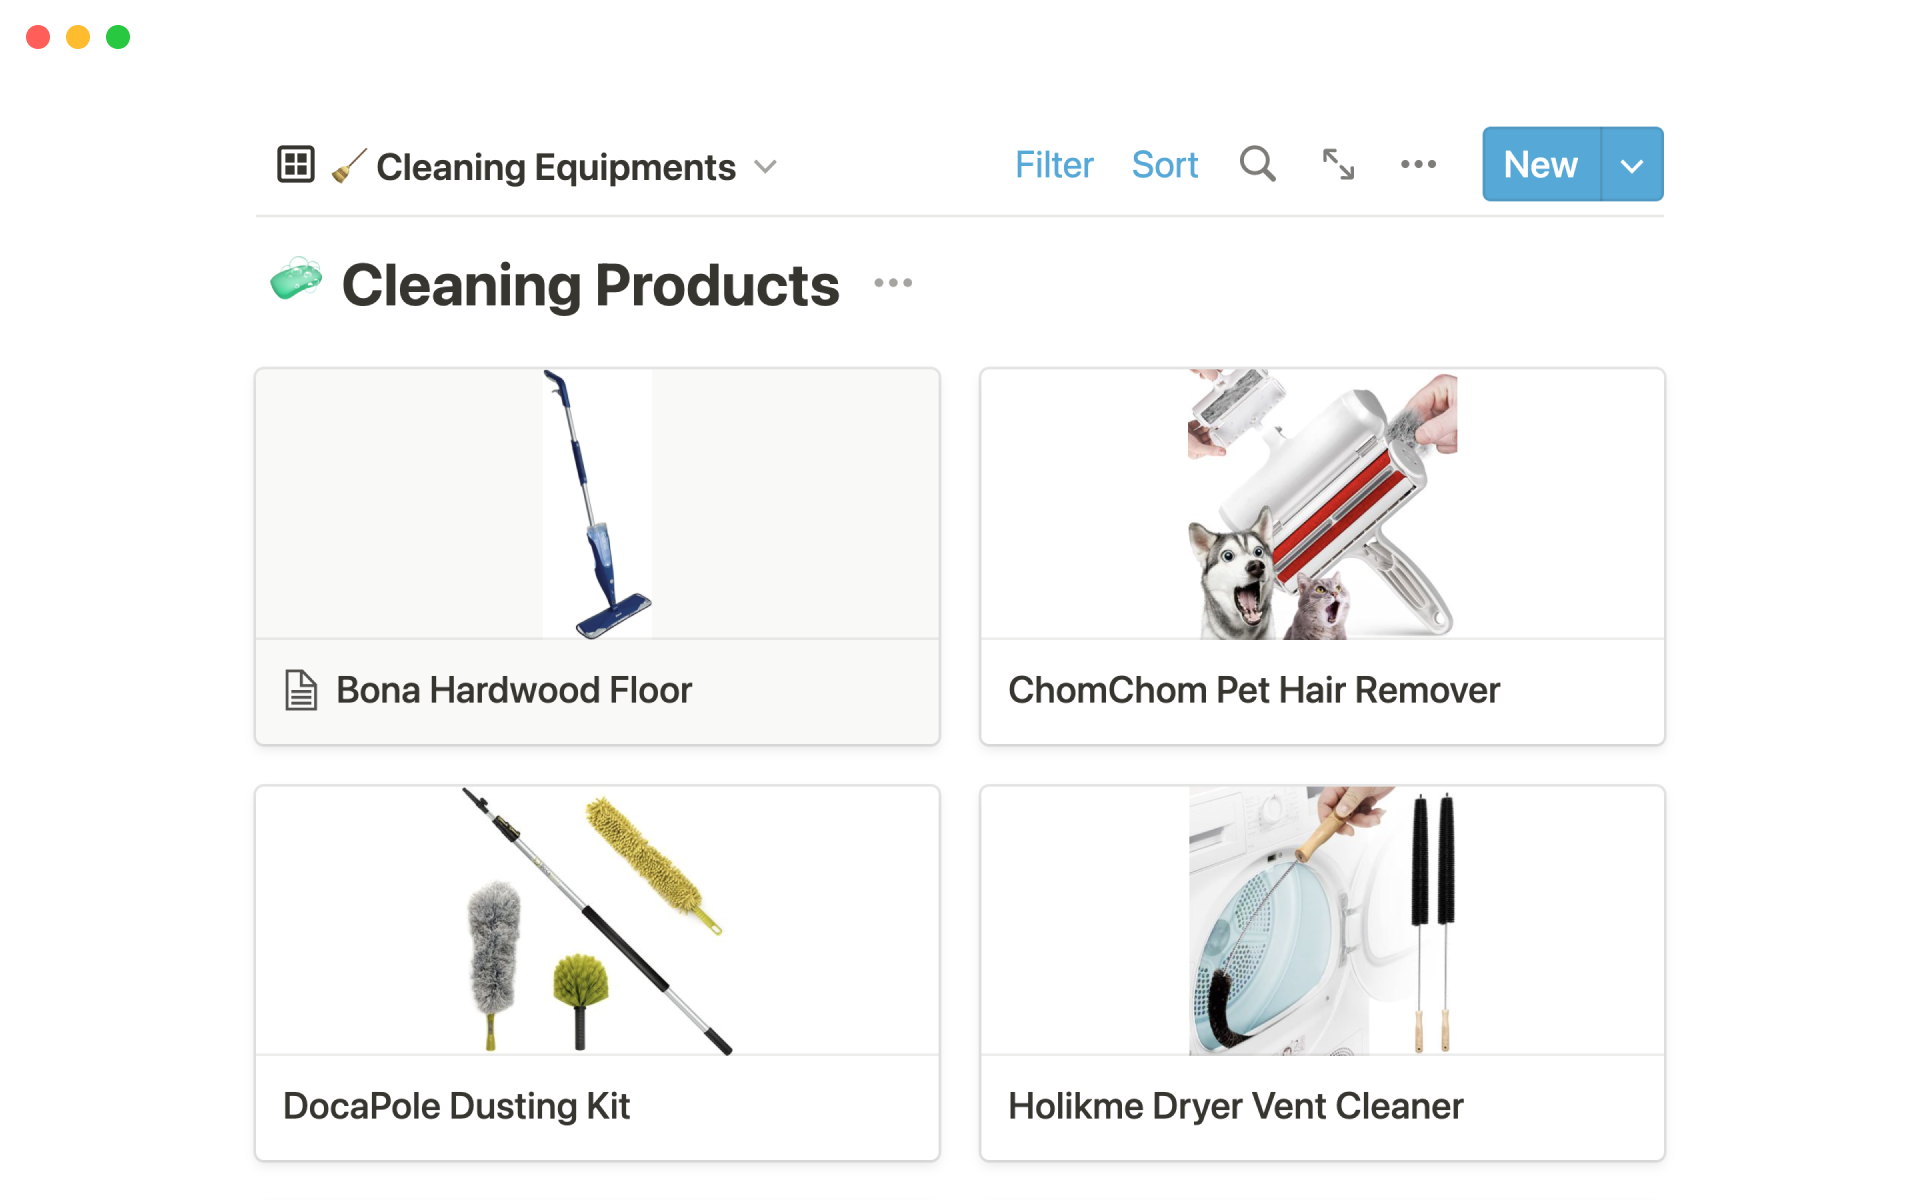 Stay on top of your cleaning schedule by organizing your cleaning products and equipment.